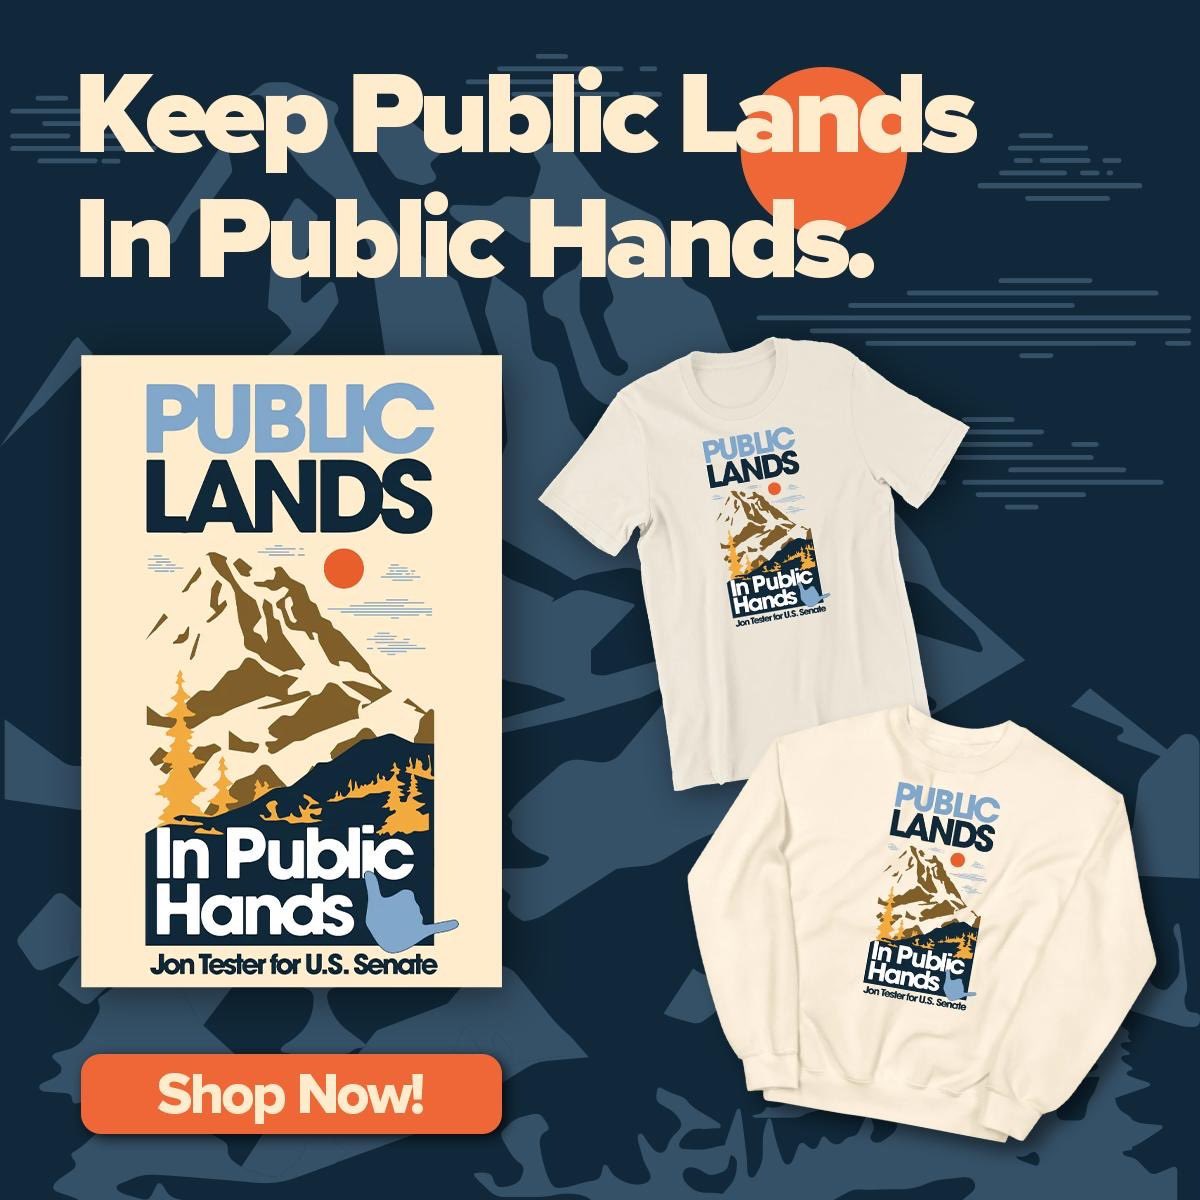 It’s #NationalParkWeek, and in Montana, we know how important it is to keep public lands in public hands. Get your limited-edition merch before we sell out → jontester.com/publiclands